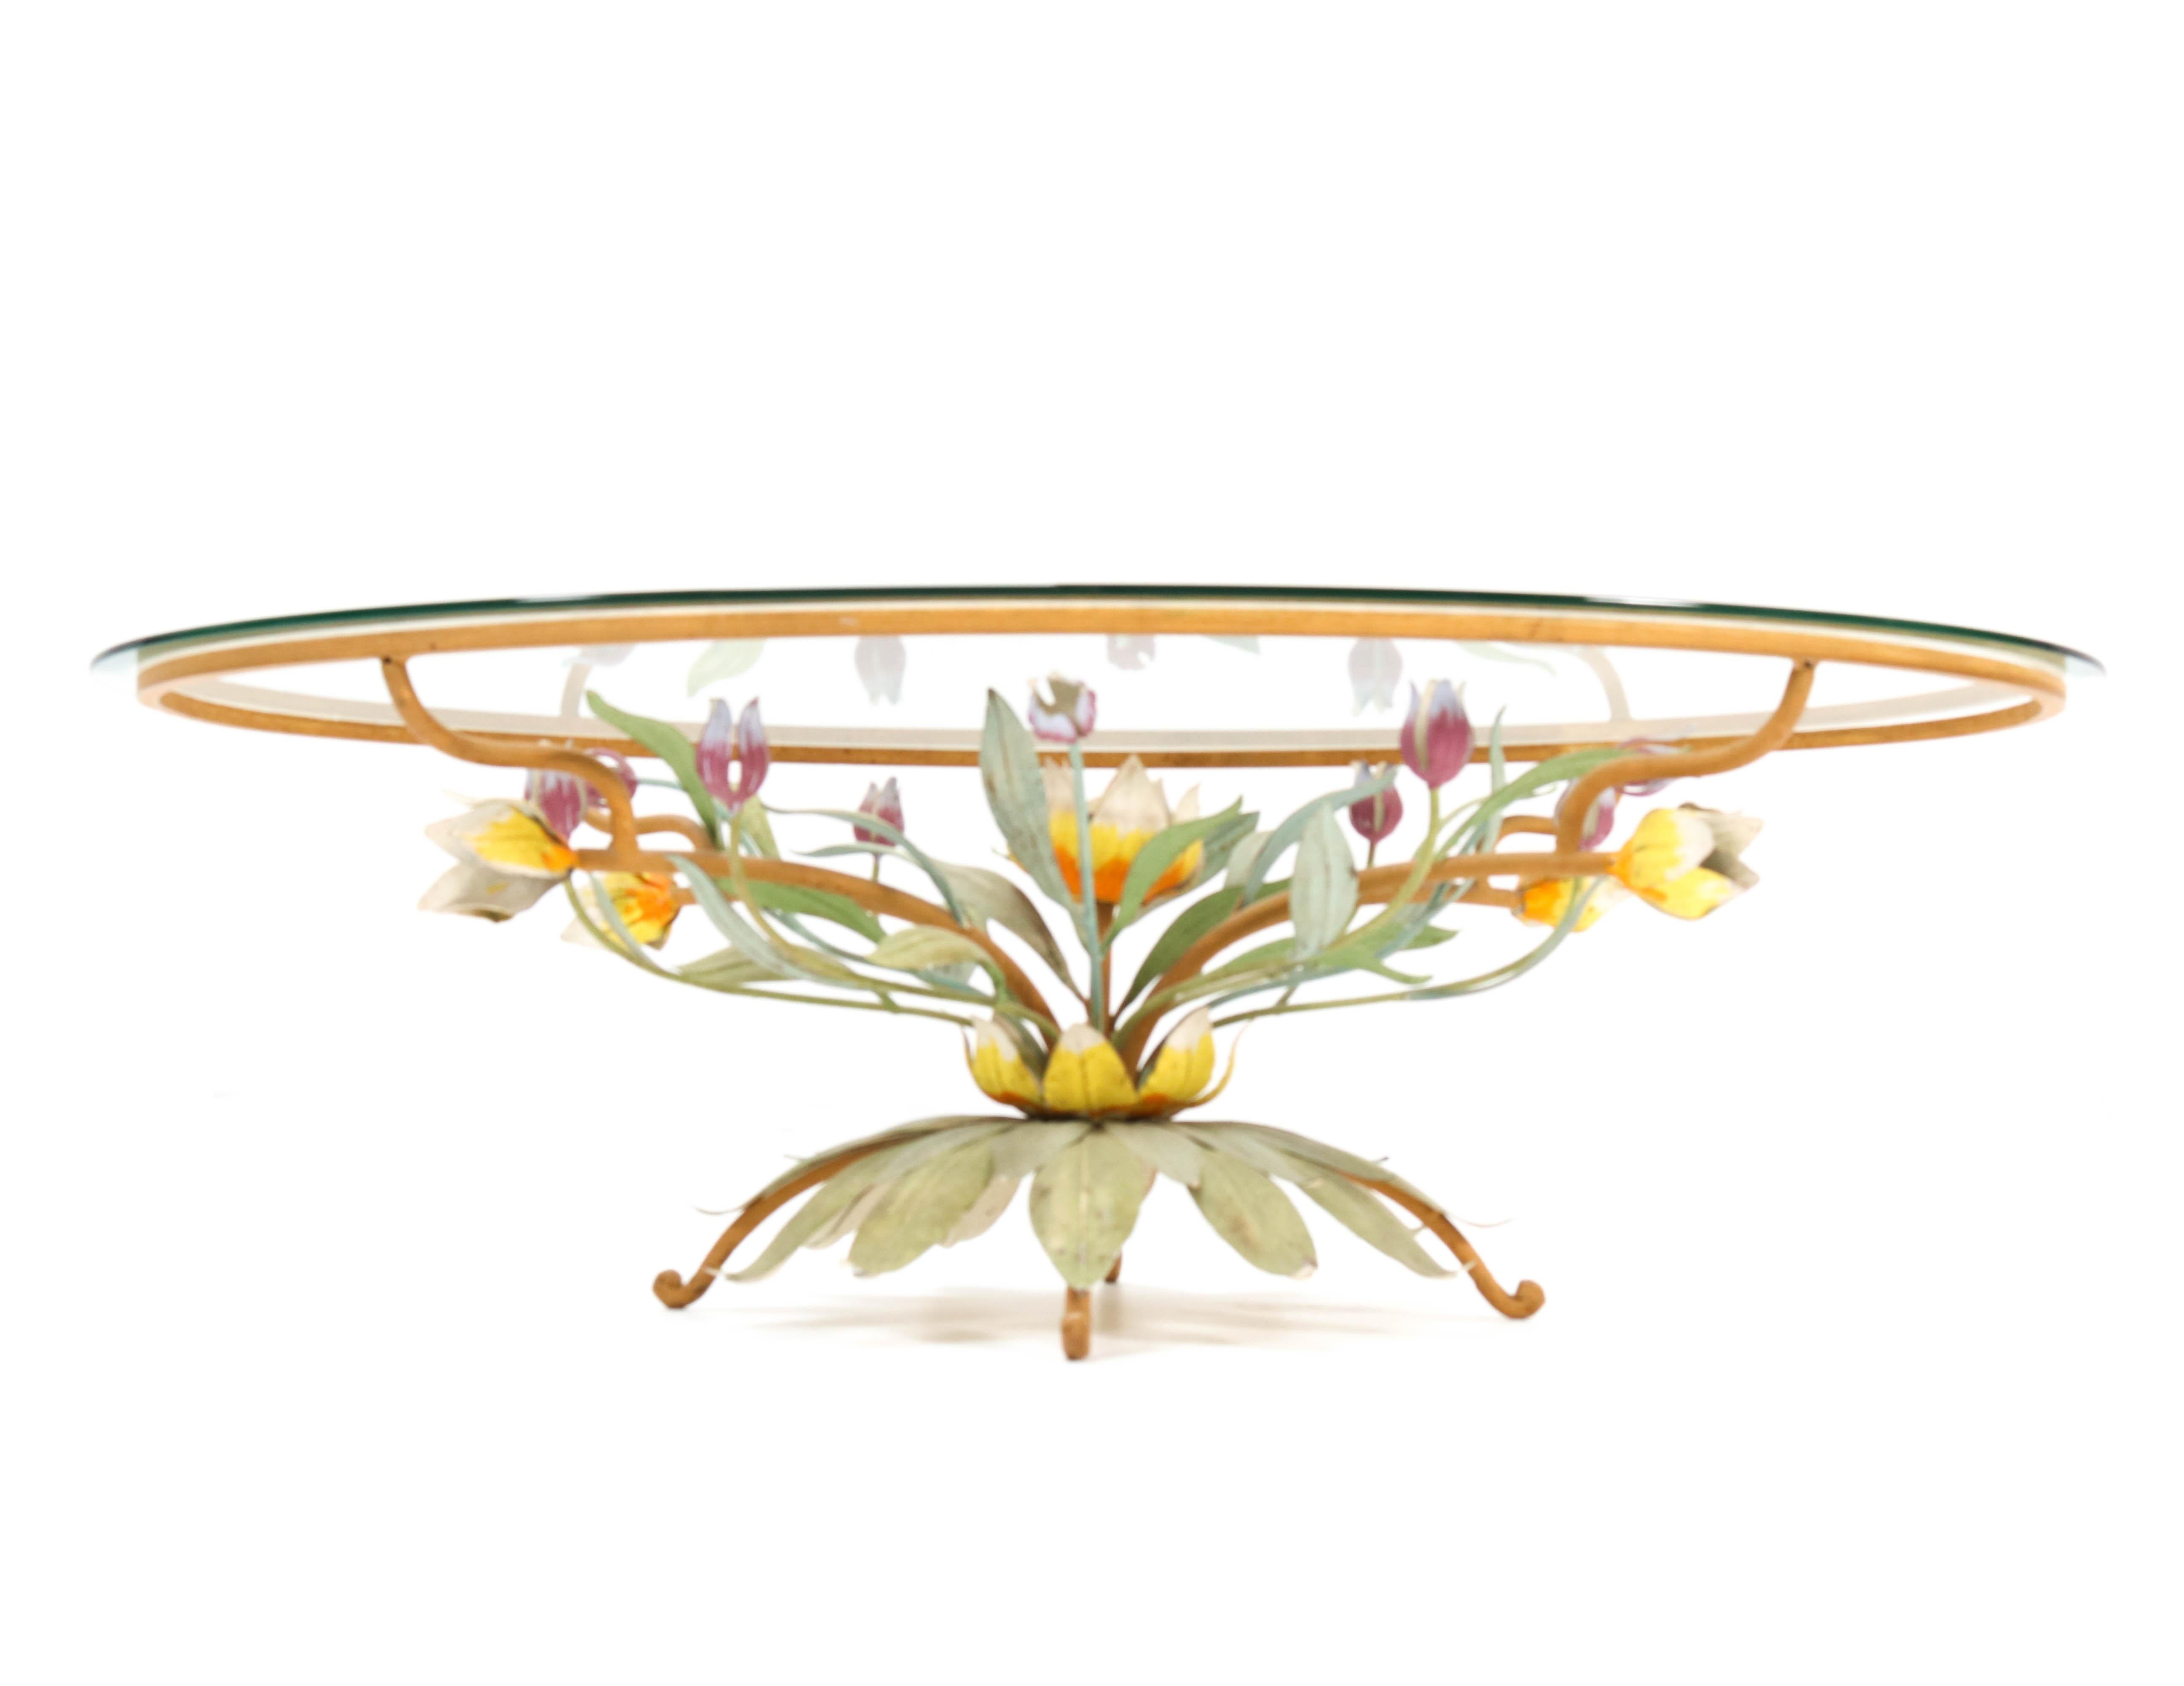 Late 20th Century Hollywood Regency Lacquered Metal Coffee Table with Beveled Glass Top, 1970s